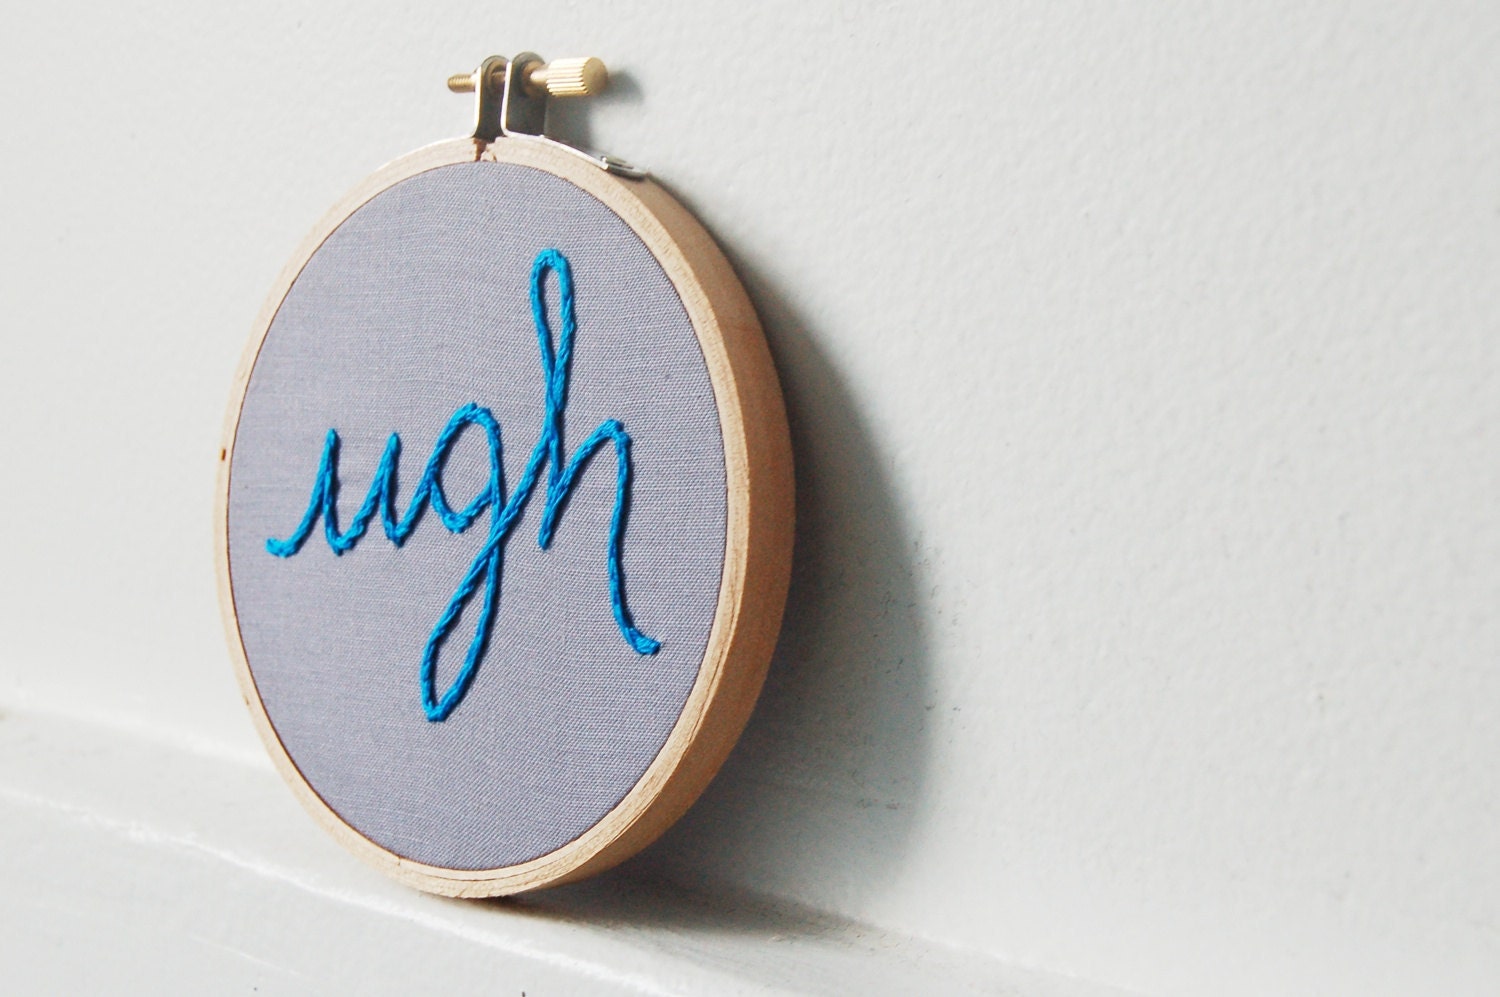 Desk Sign. Embroidery Hoop Art. Ugh. Band Embroidered by merriweathercouncil on Etsy